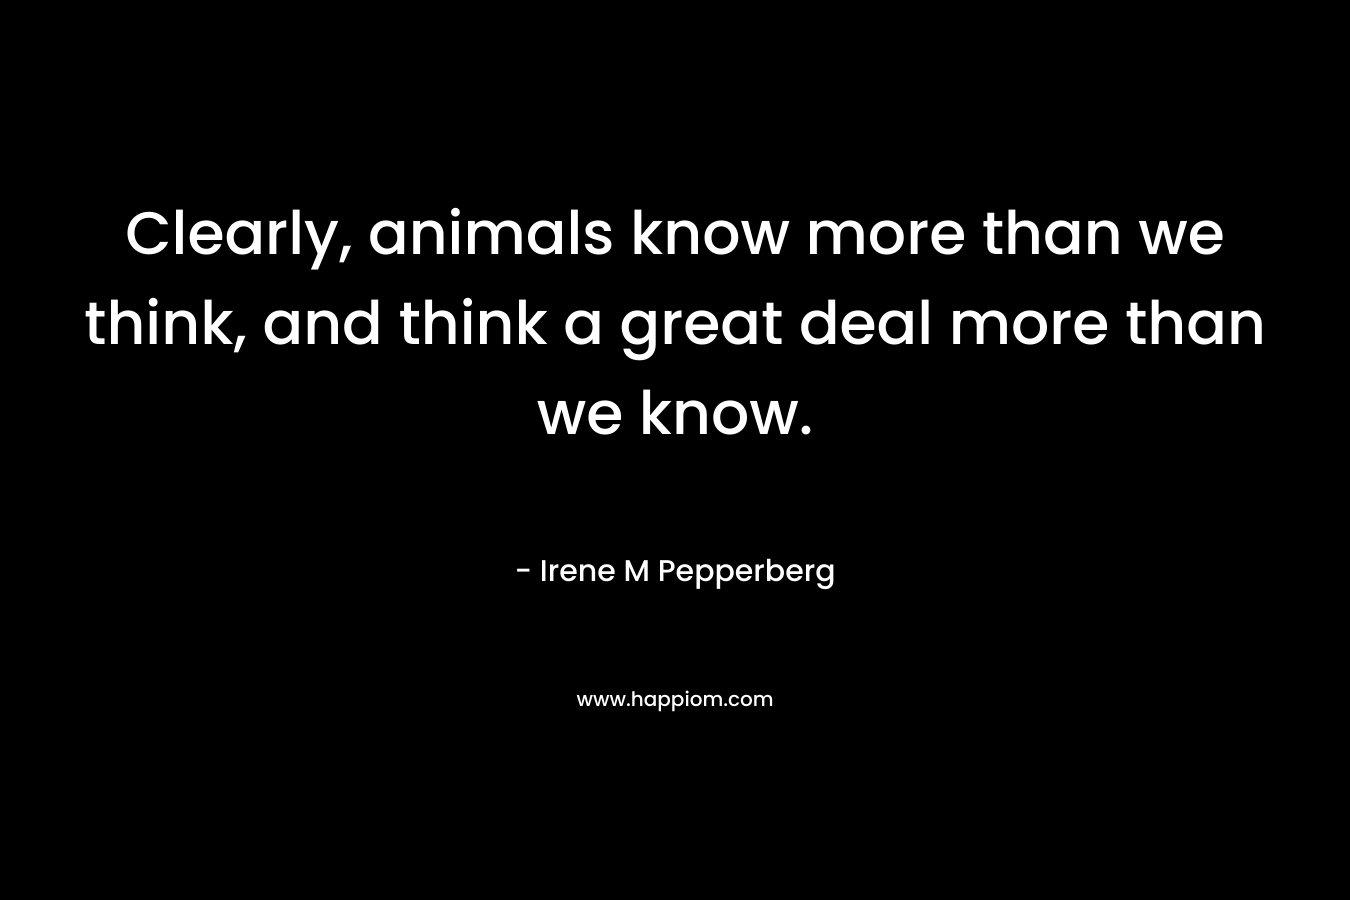 Clearly, animals know more than we think, and think a great deal more than we know.